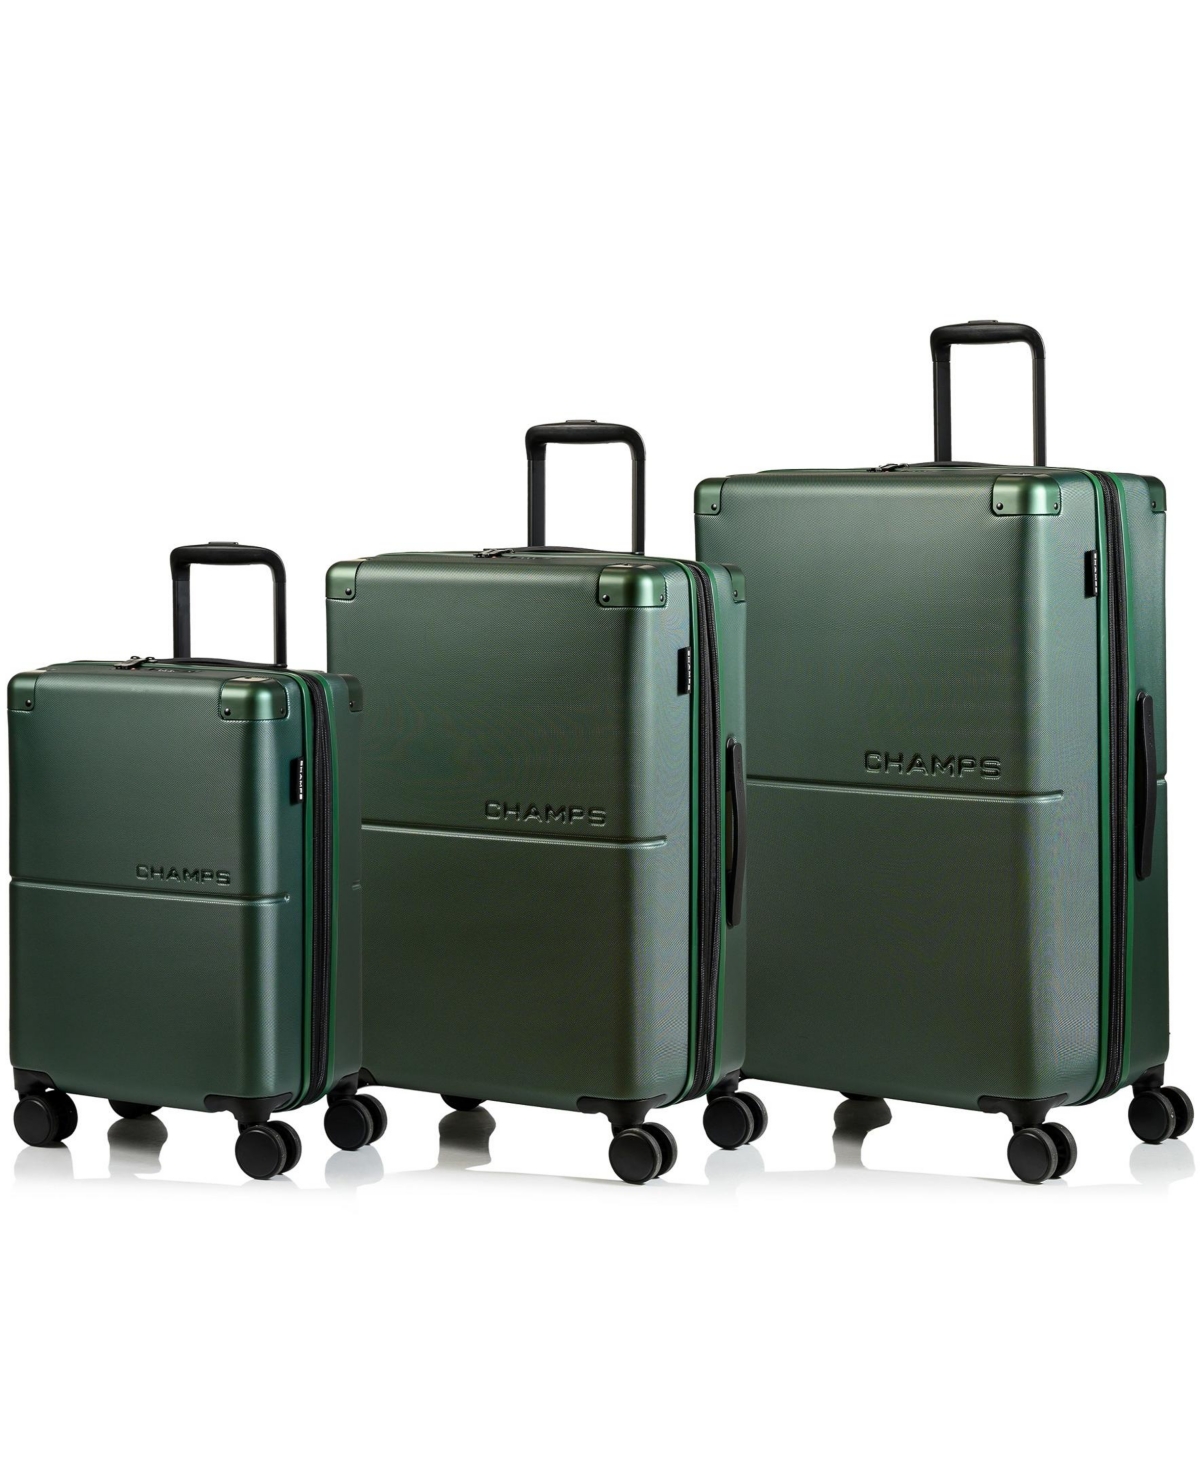 3-Piece Earth Hardside Luggage Set with Usb - Champagne